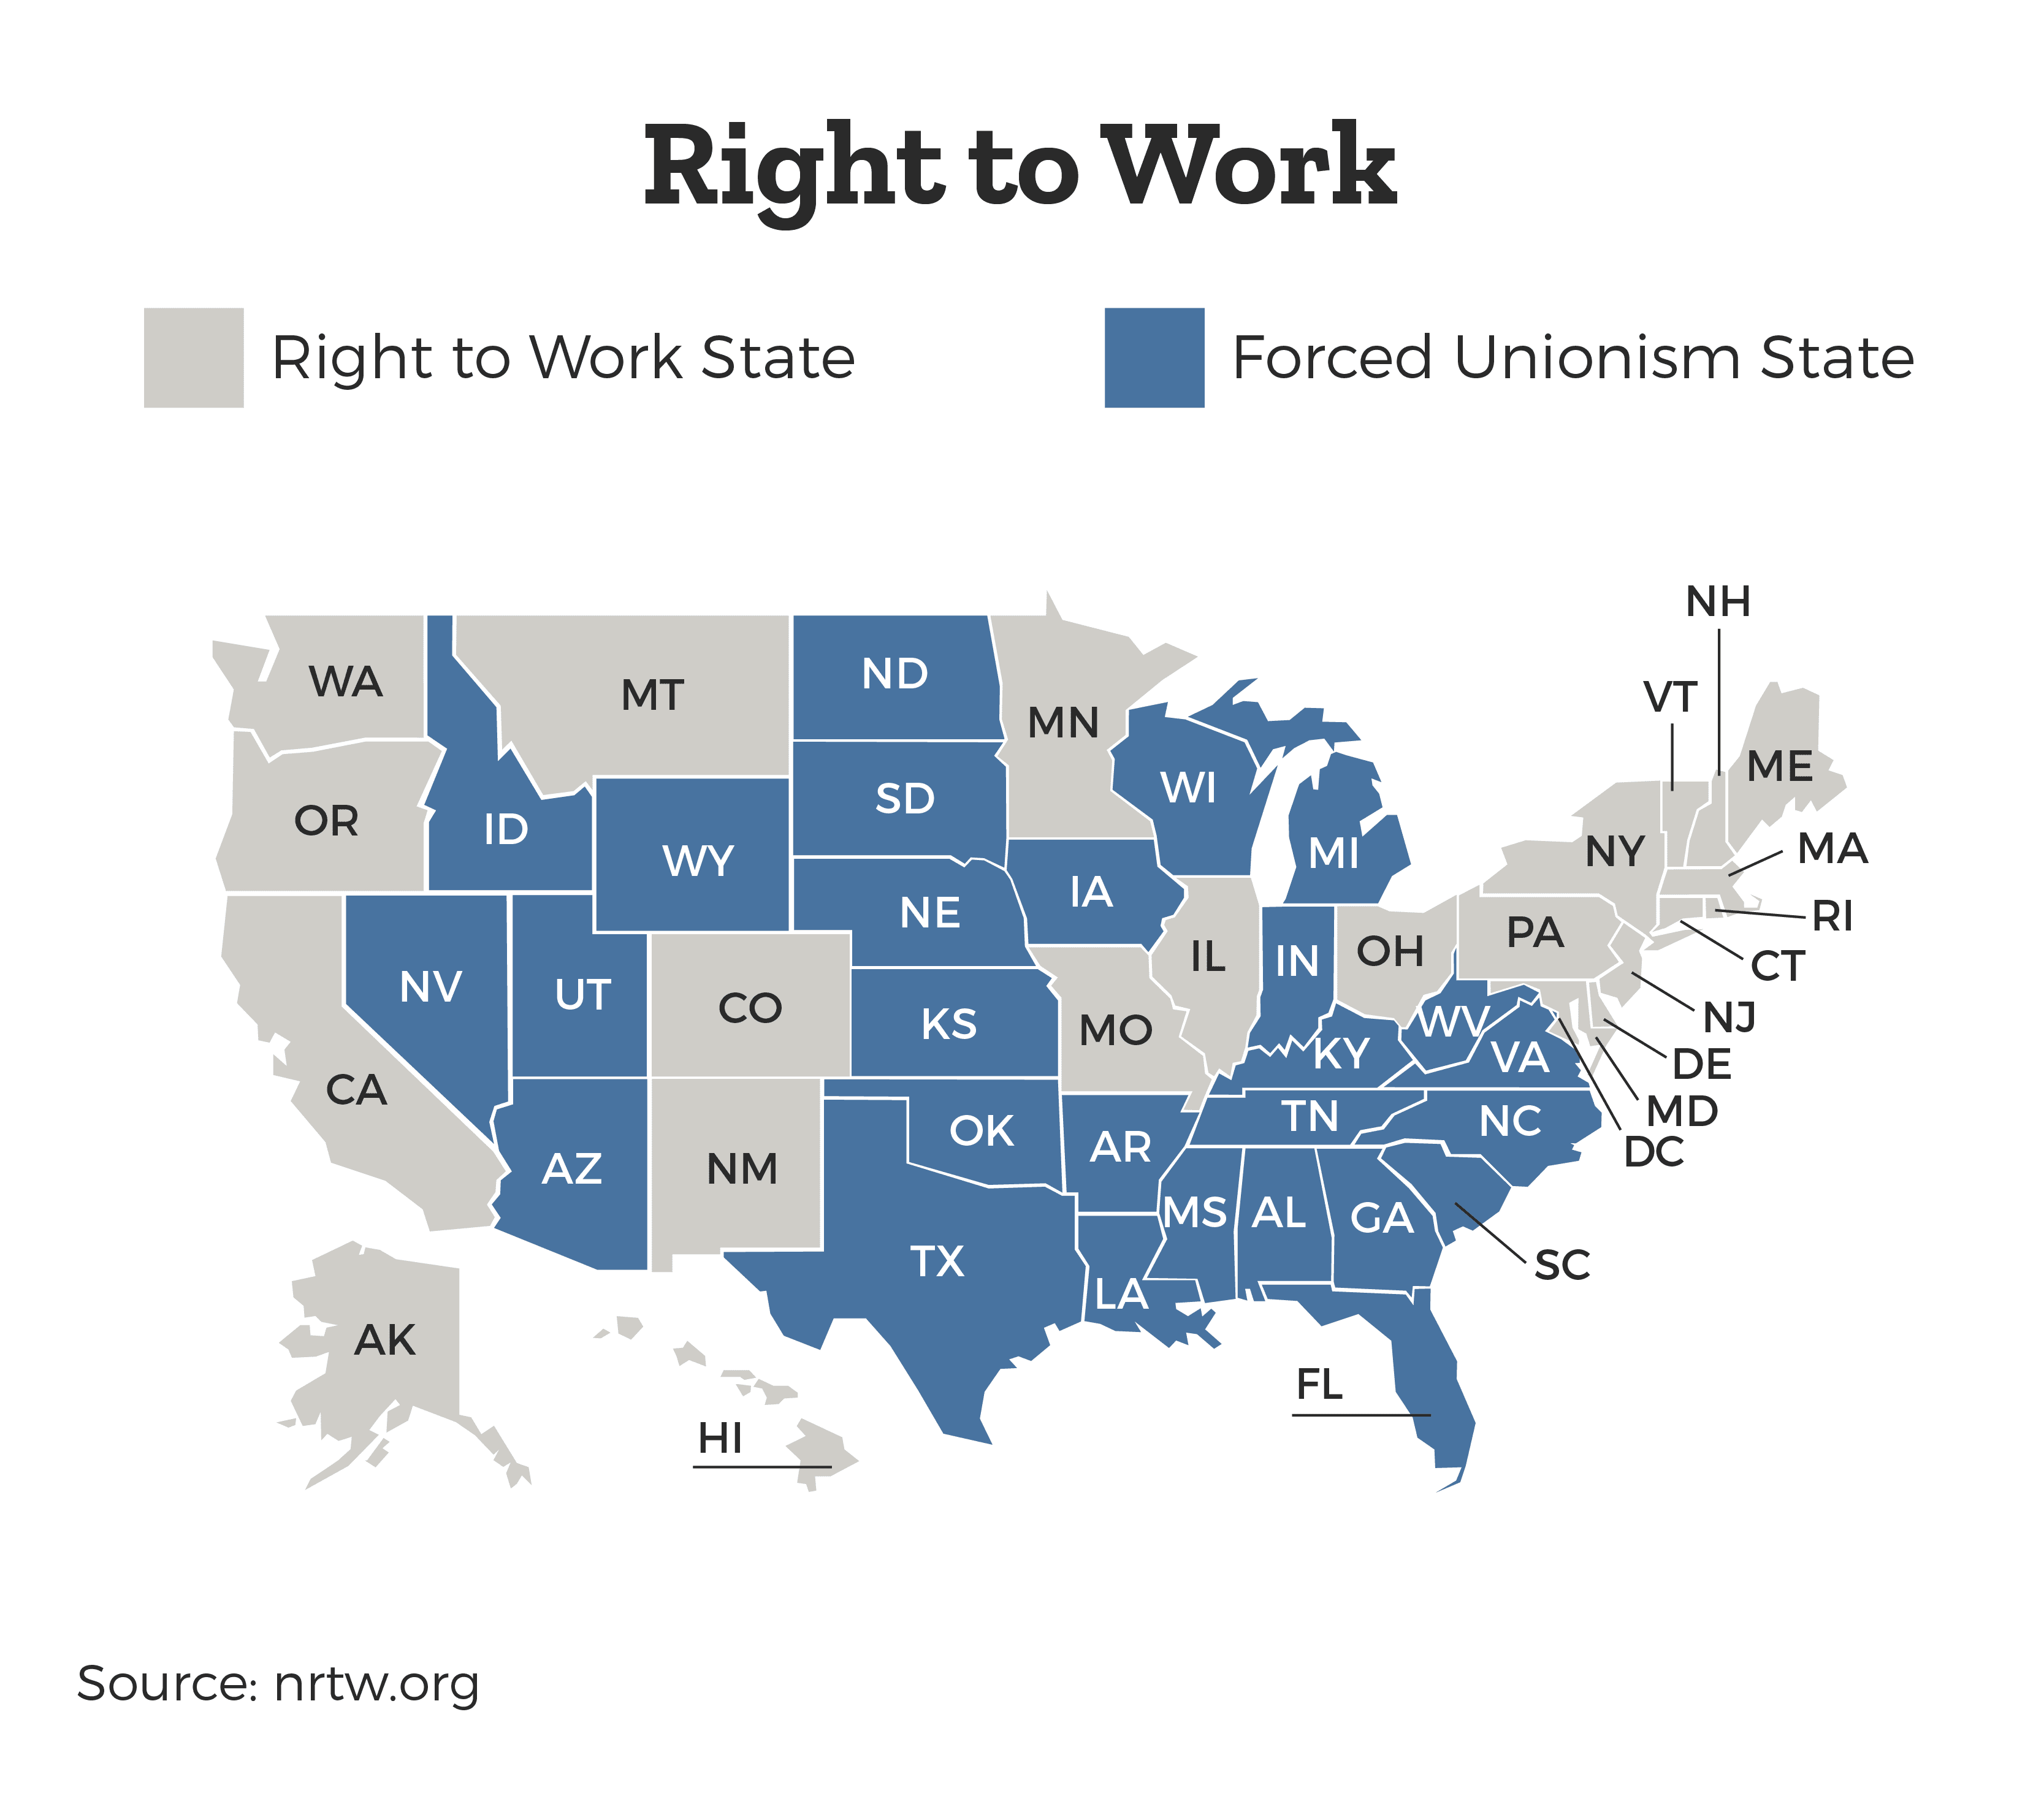 State by State US map comparing which states are right to work and which states are forced unionism.